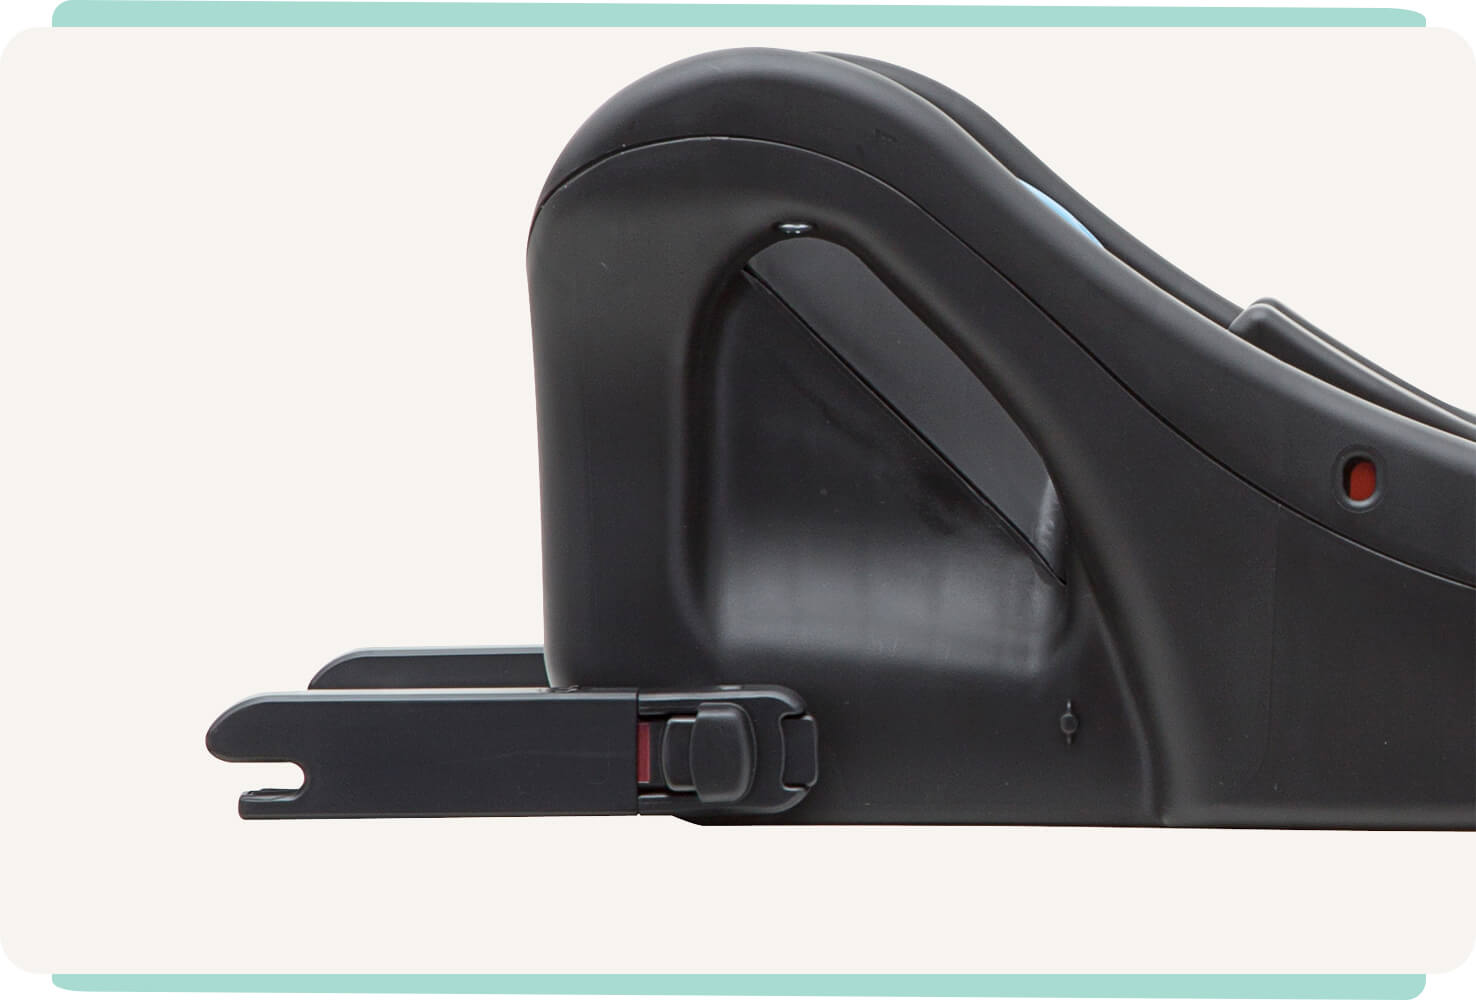  Closeup on the ISOFIX connectors of the i-Base car seat base.